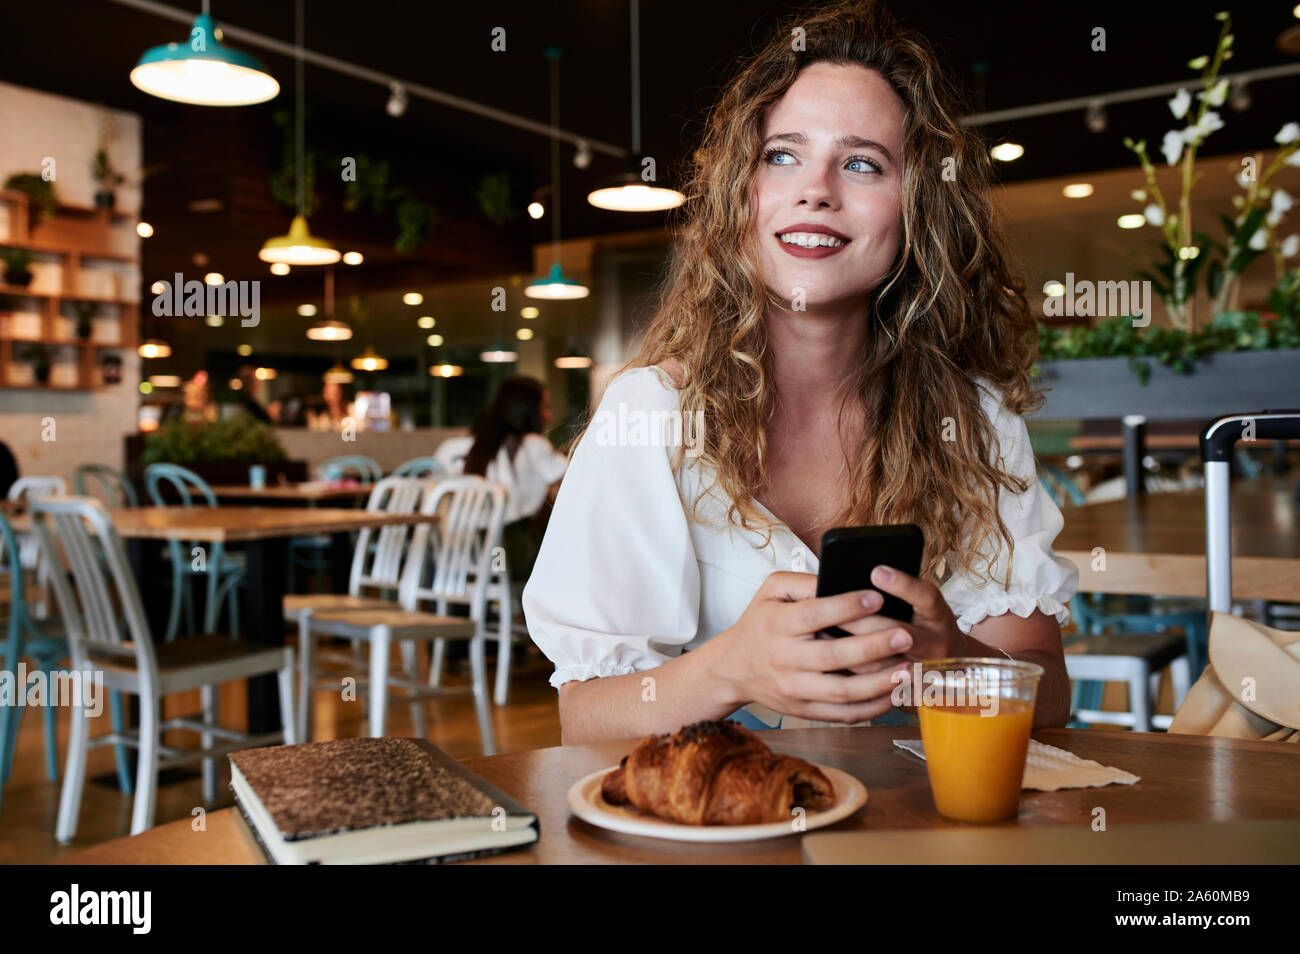 Smiling young woman with smartphone in a cafe having breakfast Stock Photo